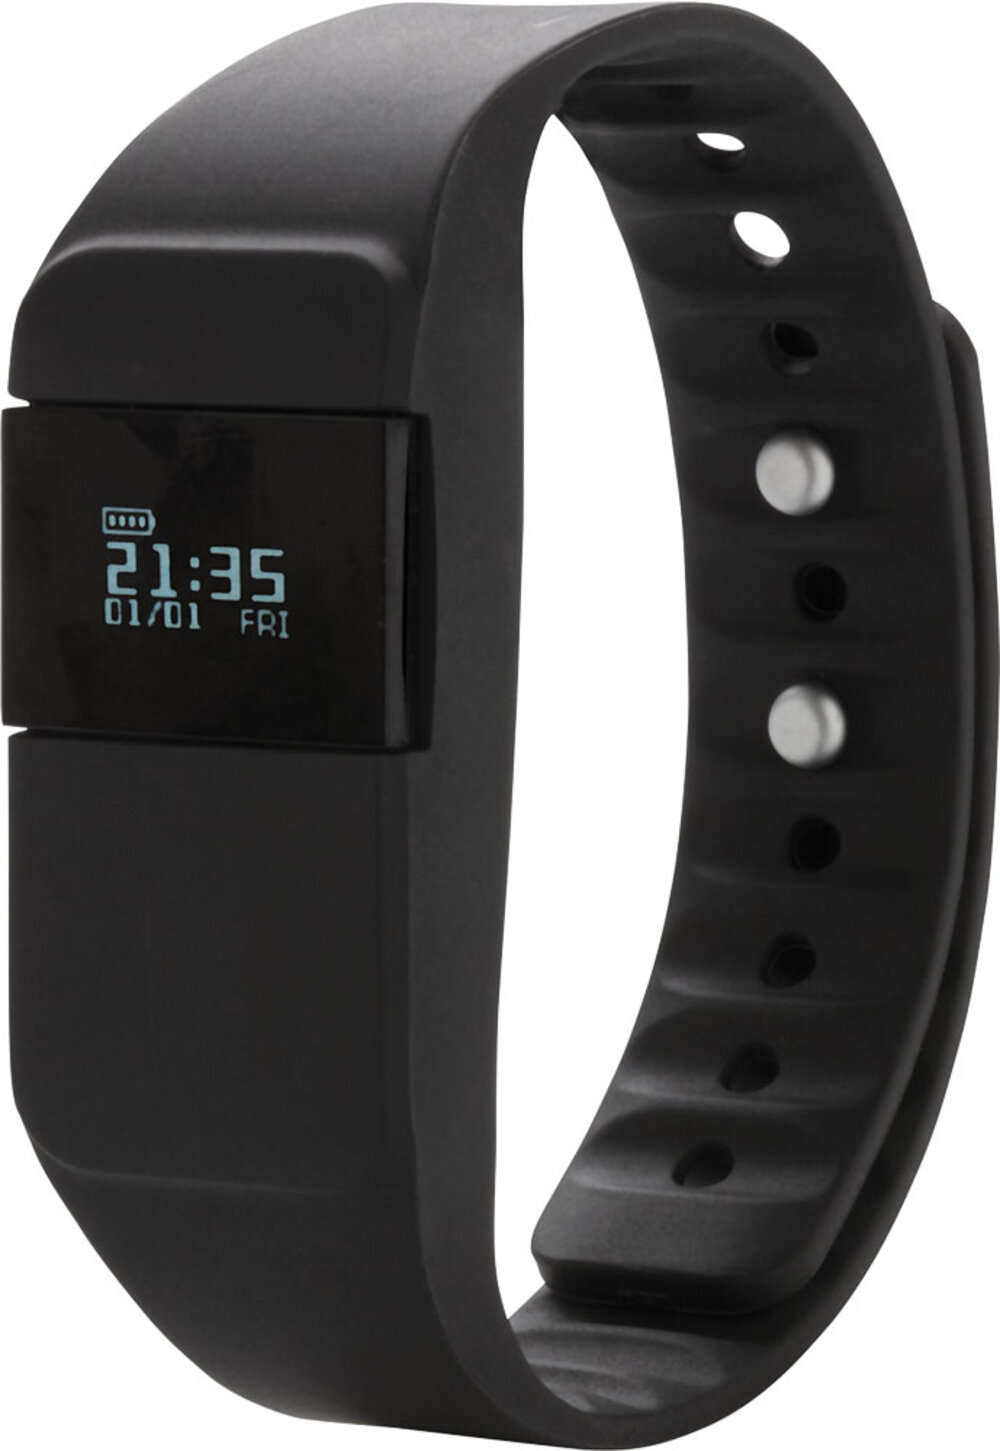 Activity Tracker "Keep fit"